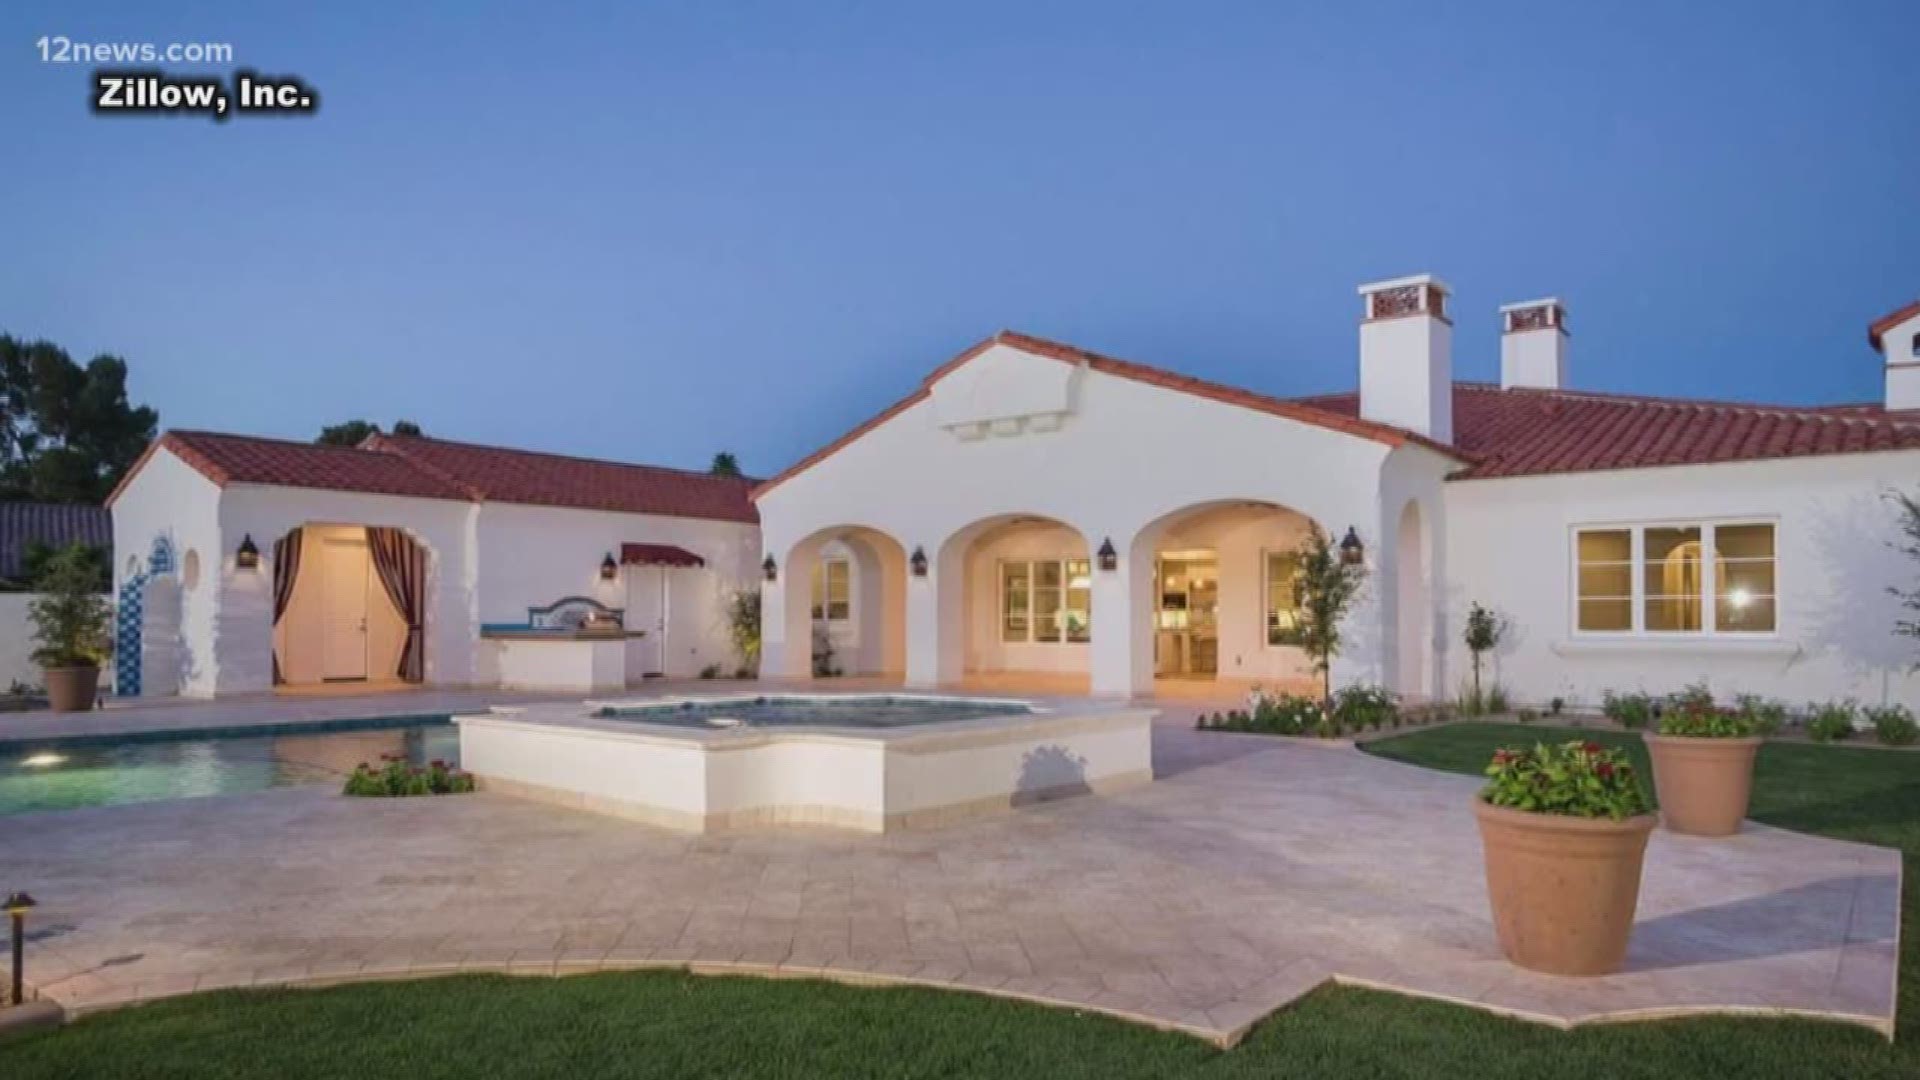 Olympic champion, Michael Phelps, is selling his home in Paradise Valley for a cool 4.1 million dollars. Check out what that kind of cash could get you.